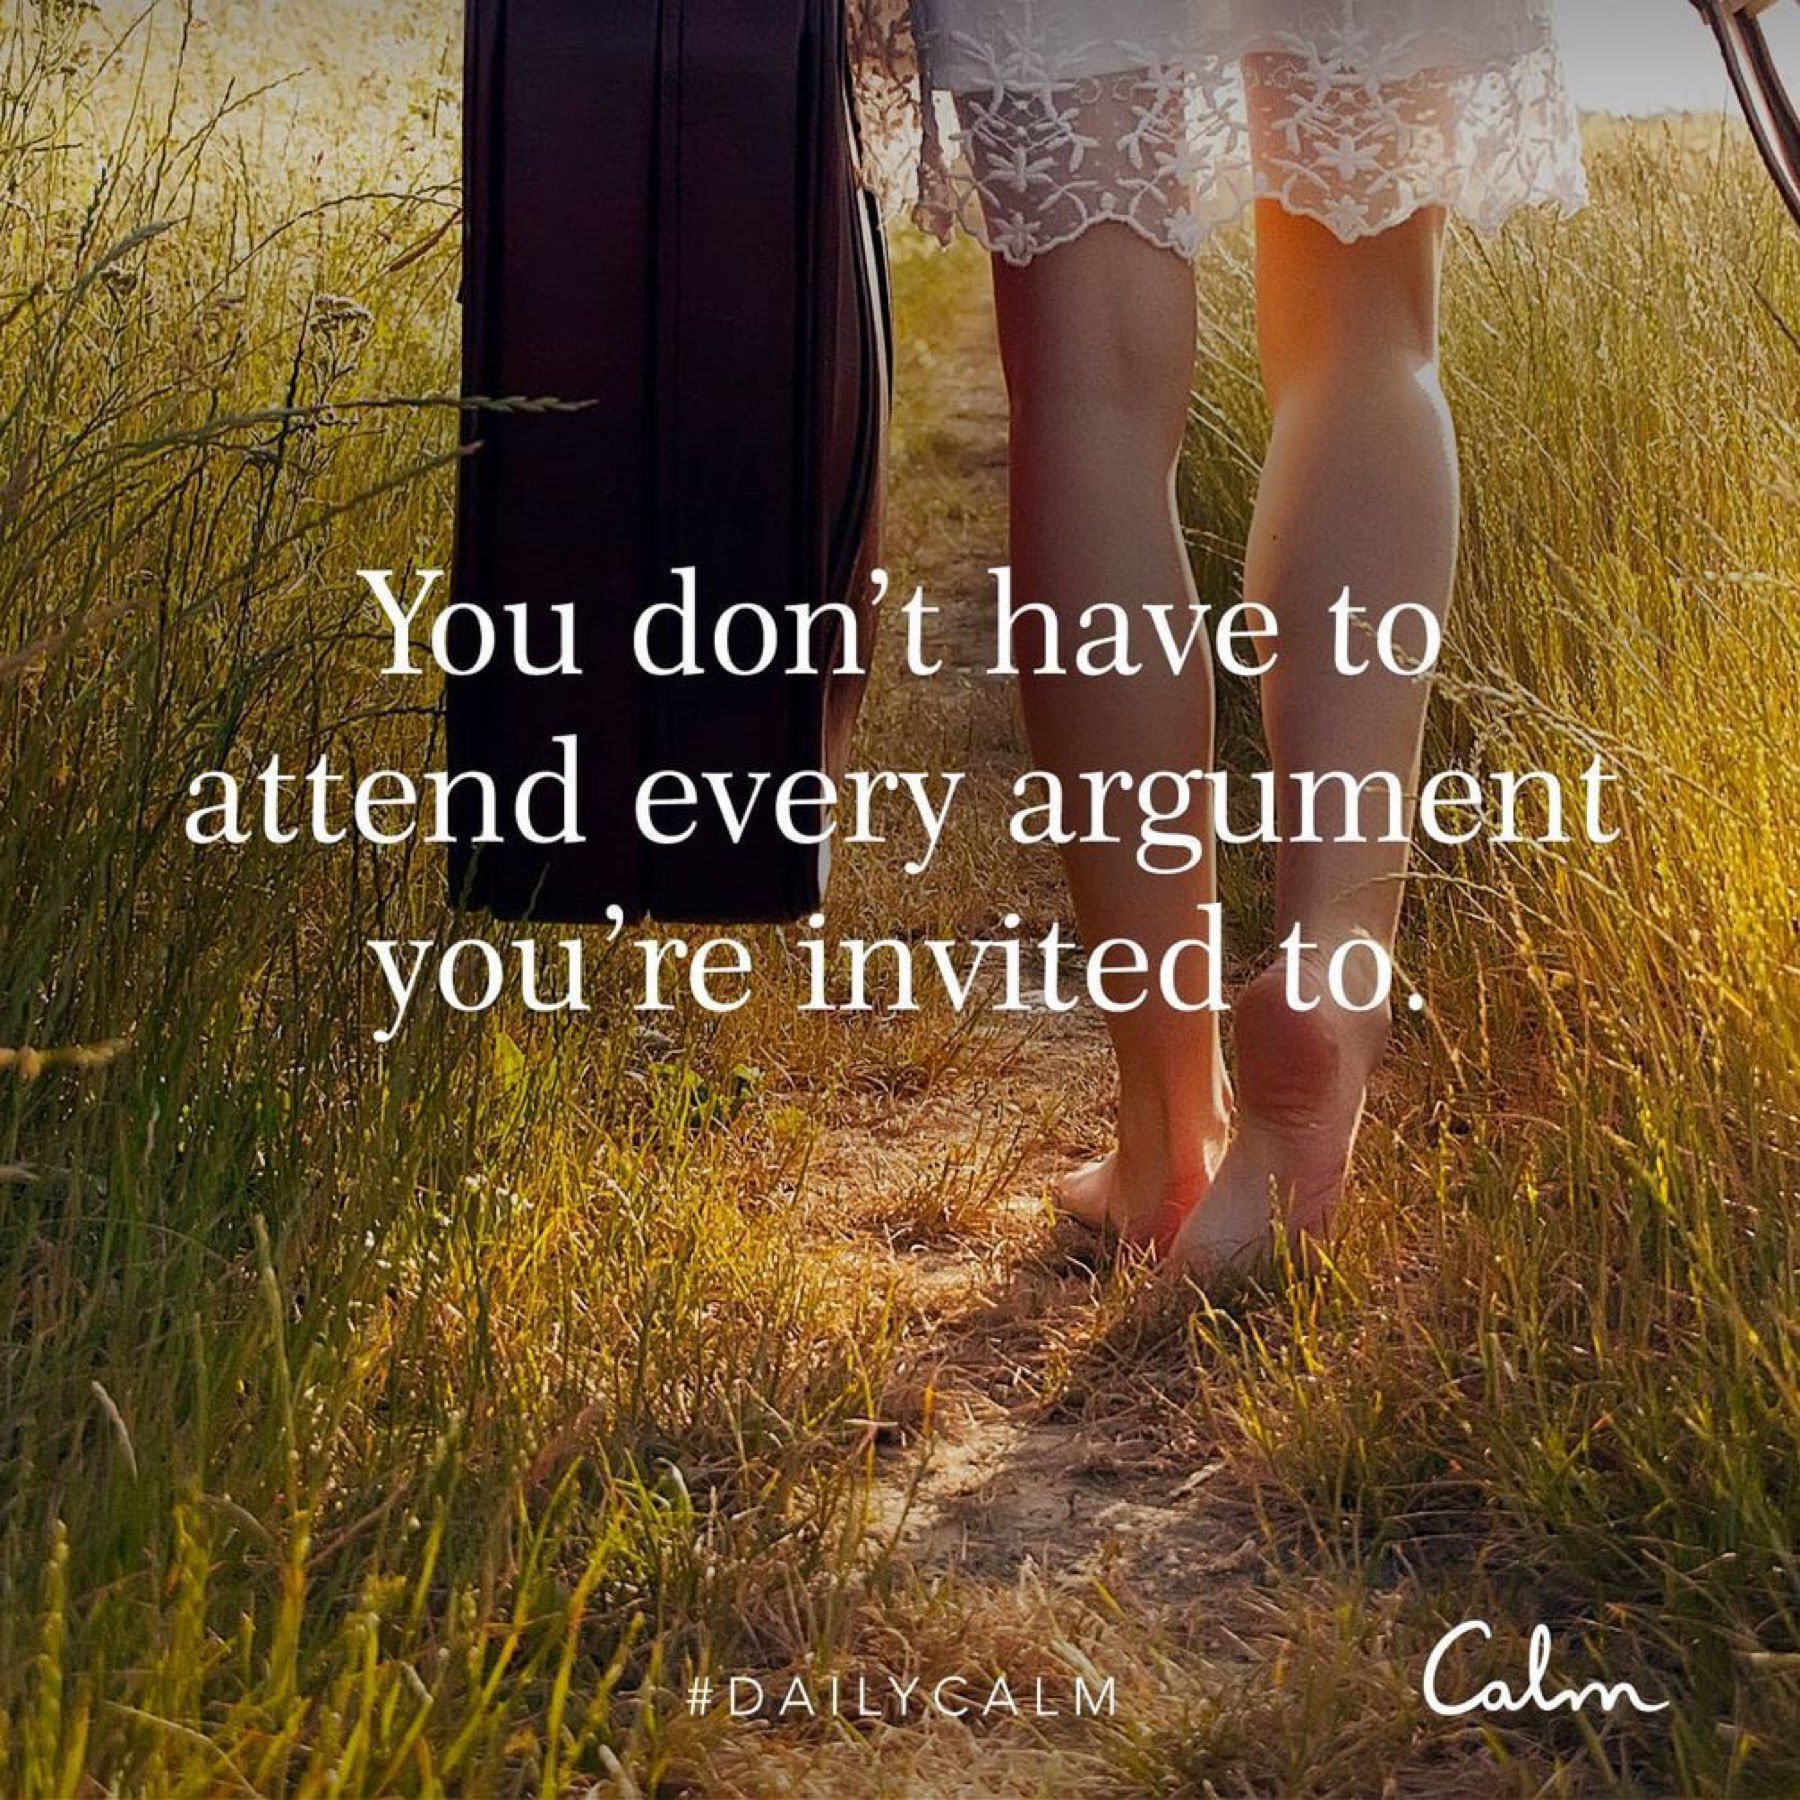 You don't have to attend every argument you're invited to